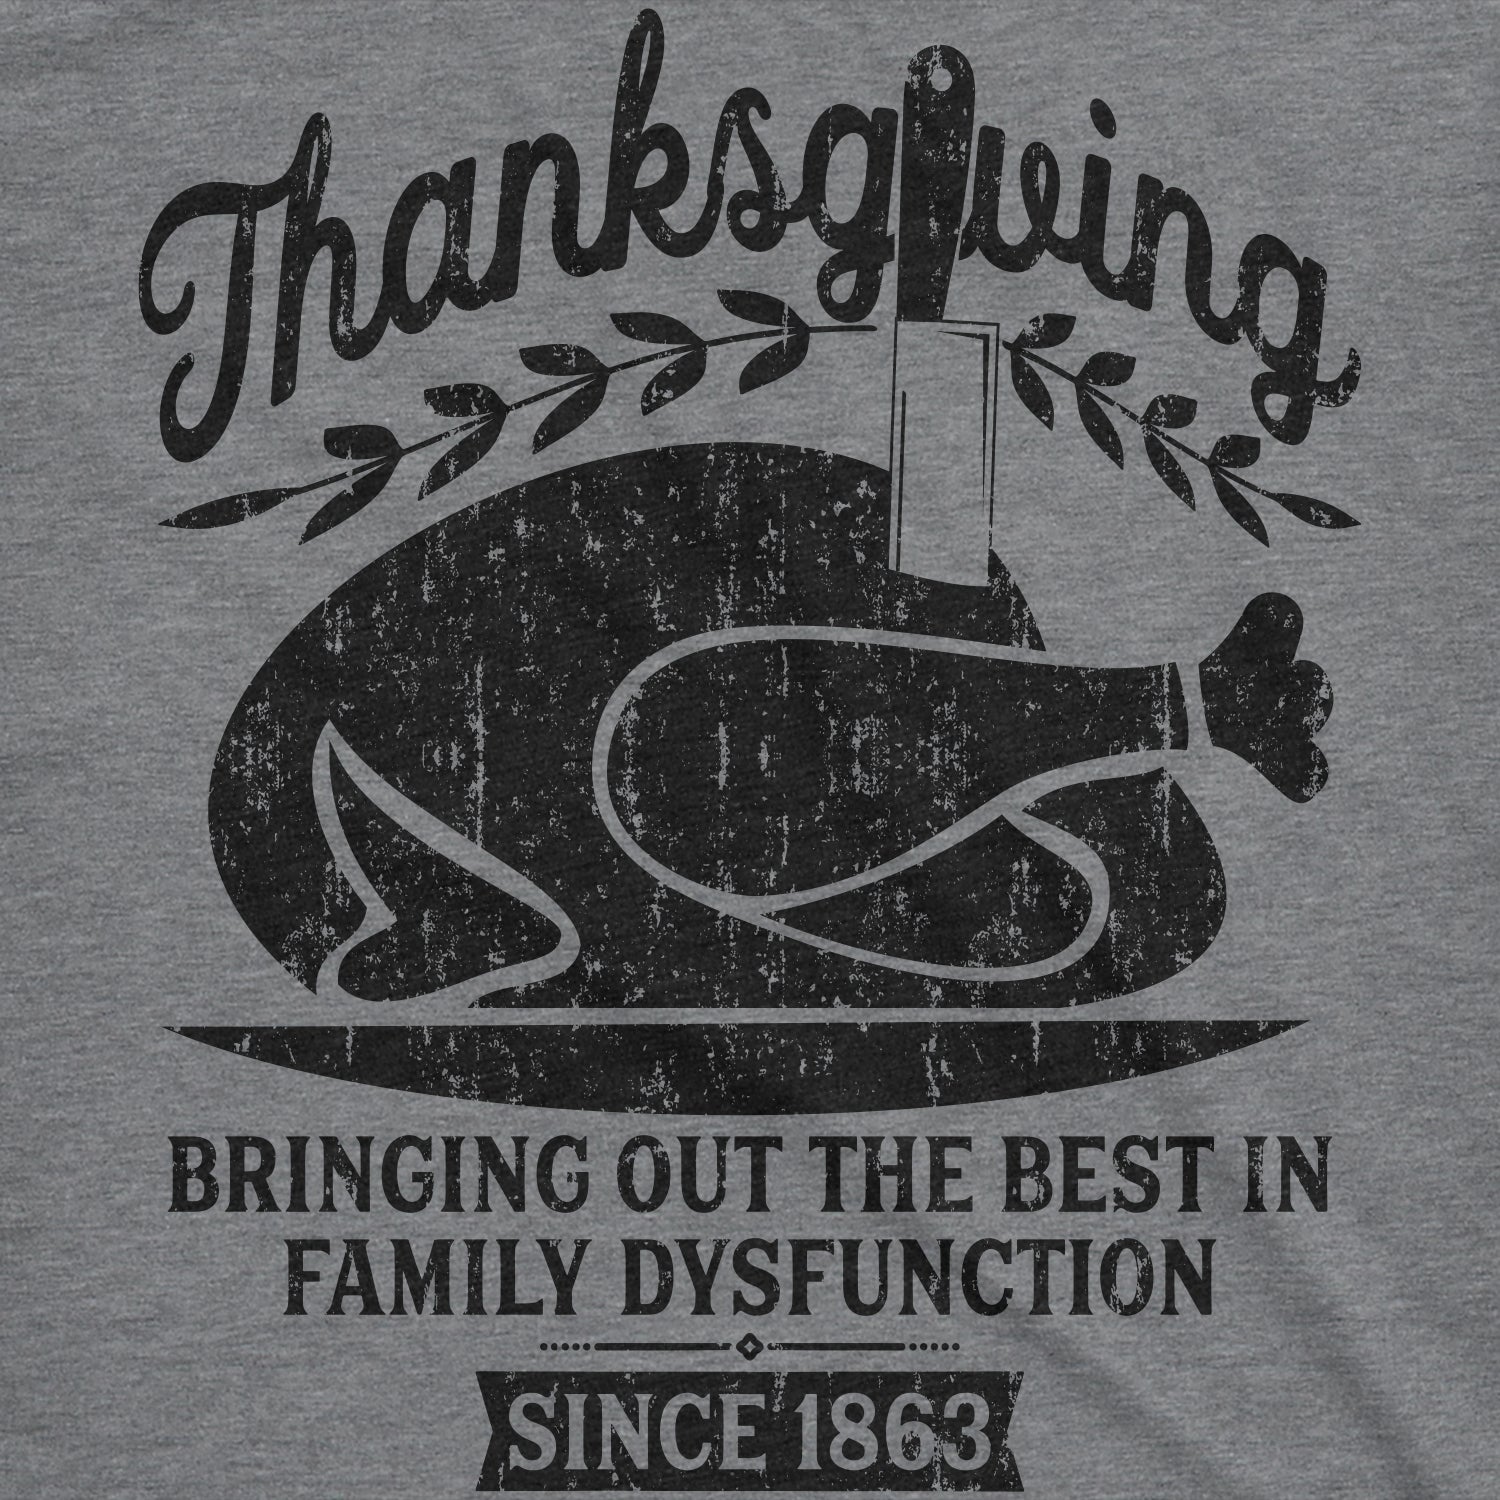 Funny Dark Heather Grey Thanksgiving Bringing Out The Best In Family Dysfunction Womens T Shirt Nerdy Thanksgiving Sarcastic Tee